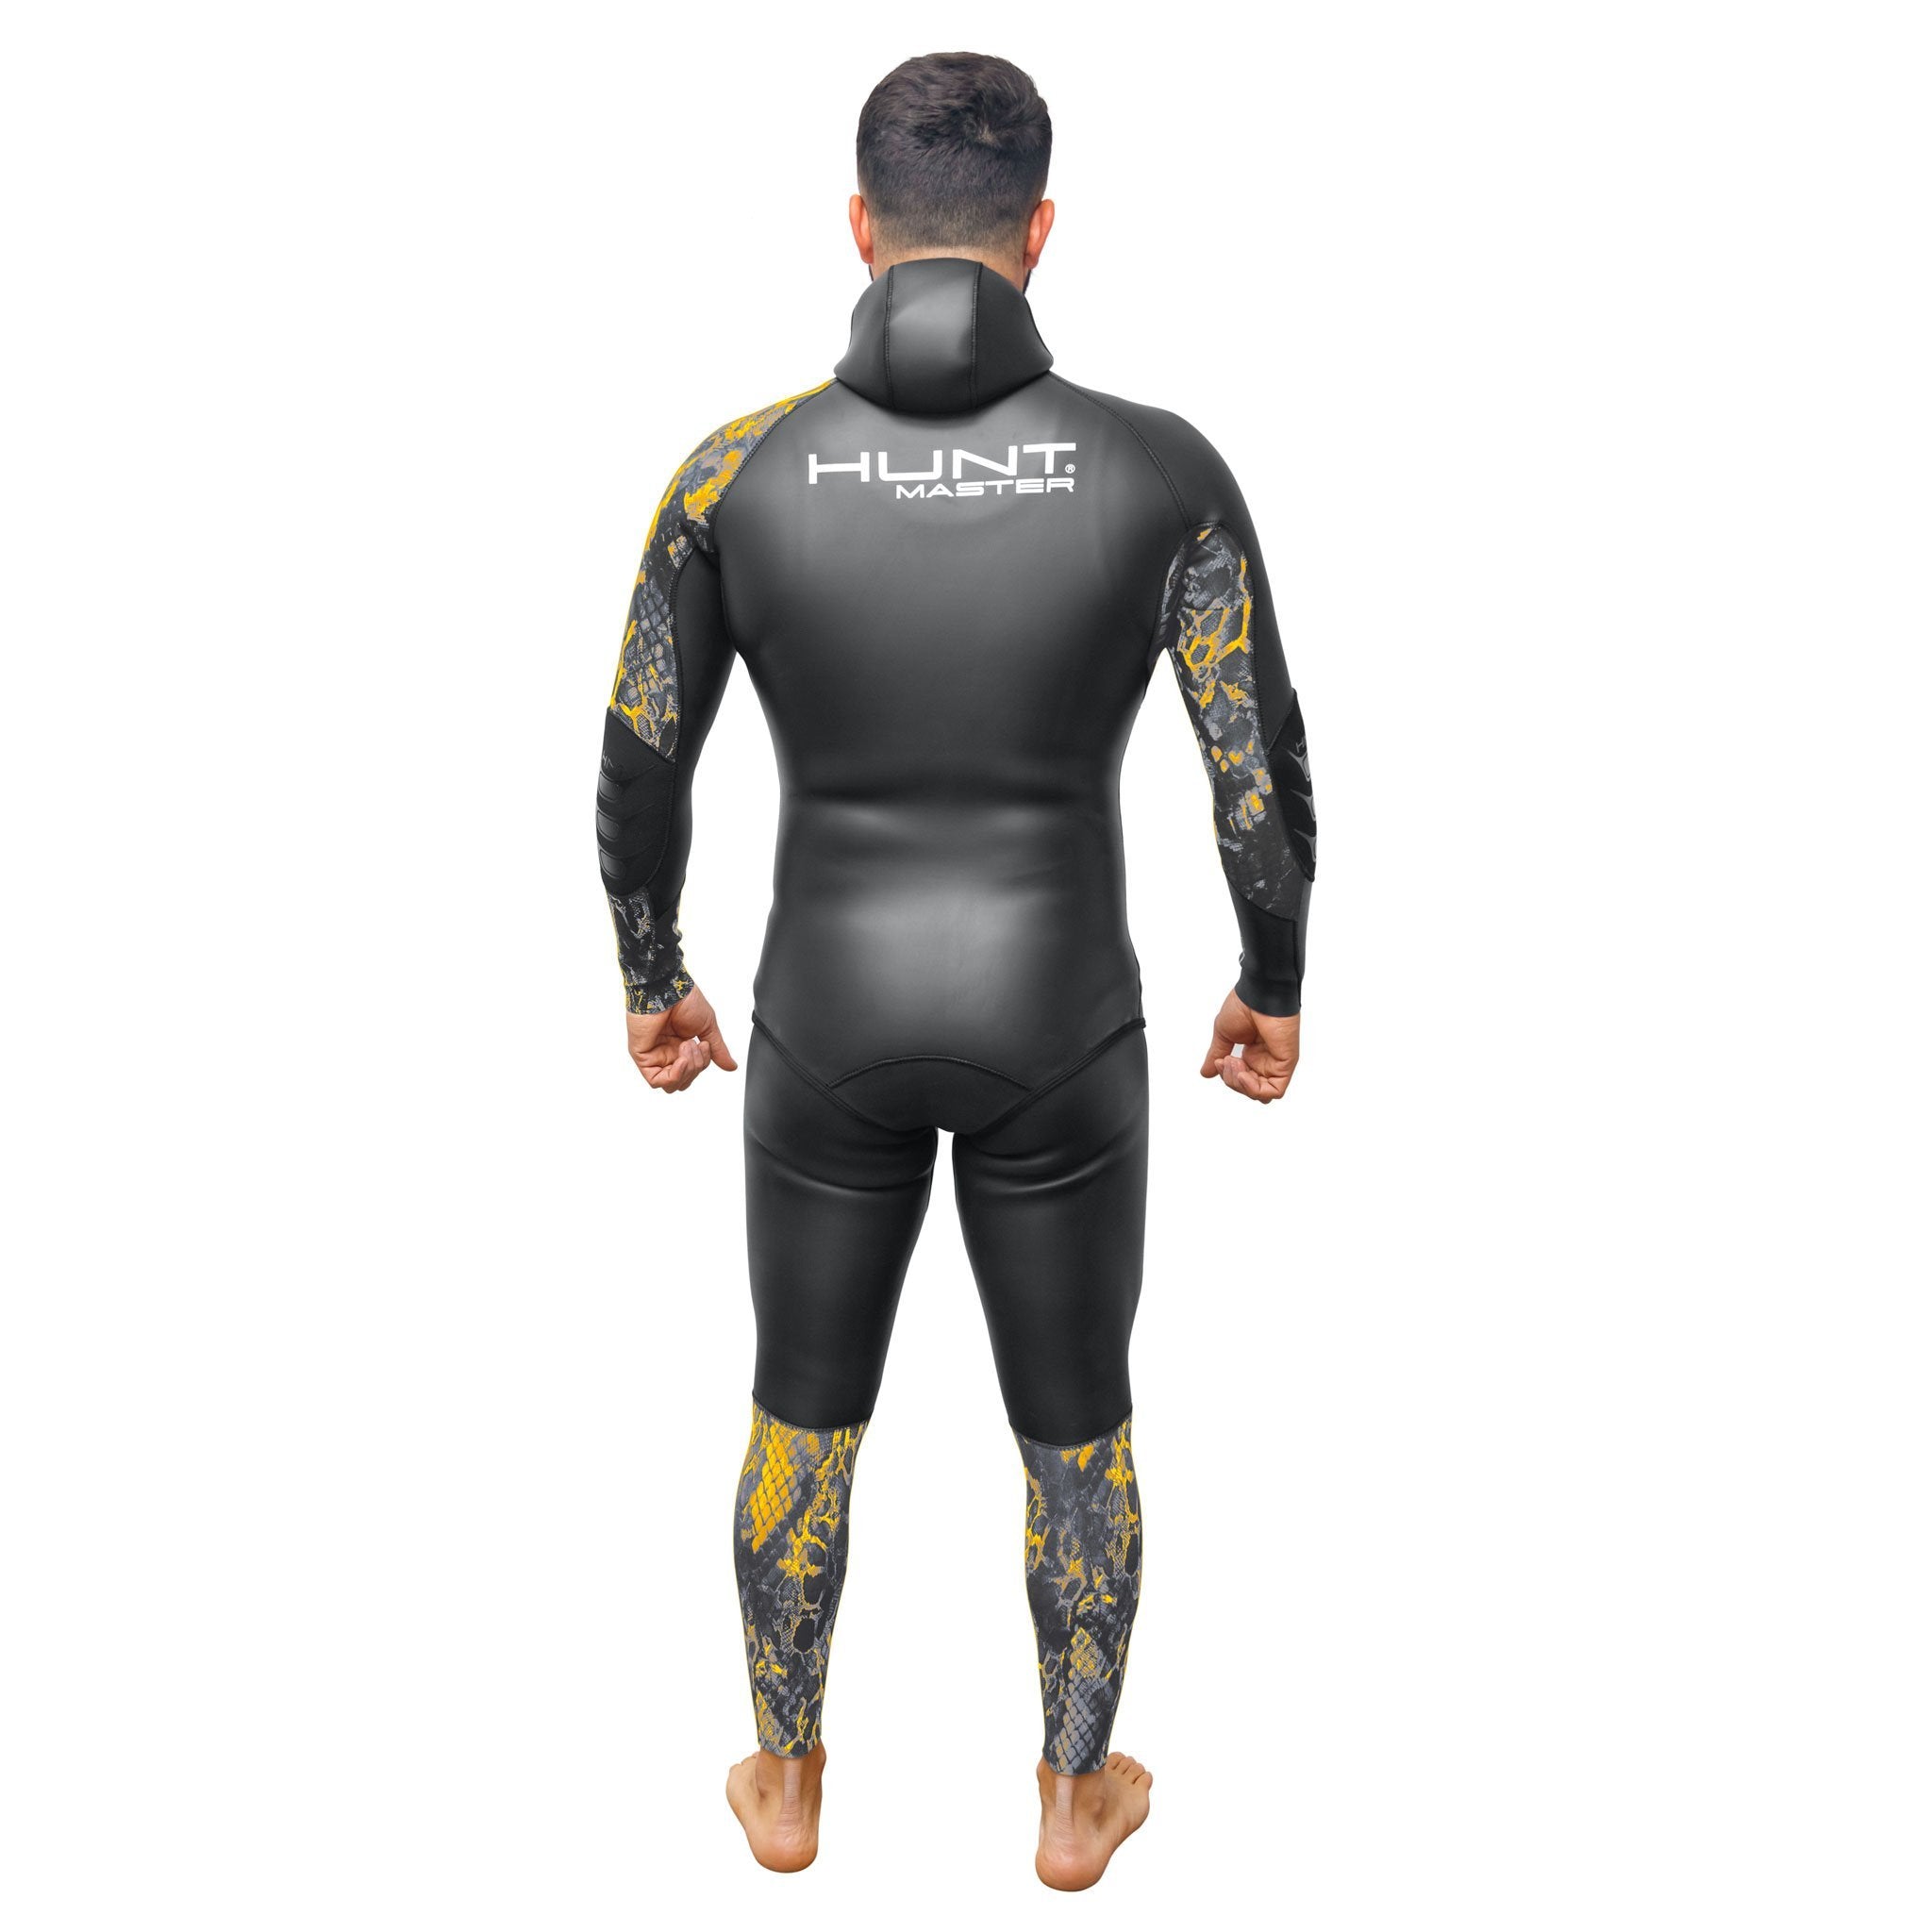 SUBLIME Smooth Skin 2-Piece Wetsuit - Long John - 2mm - Camo